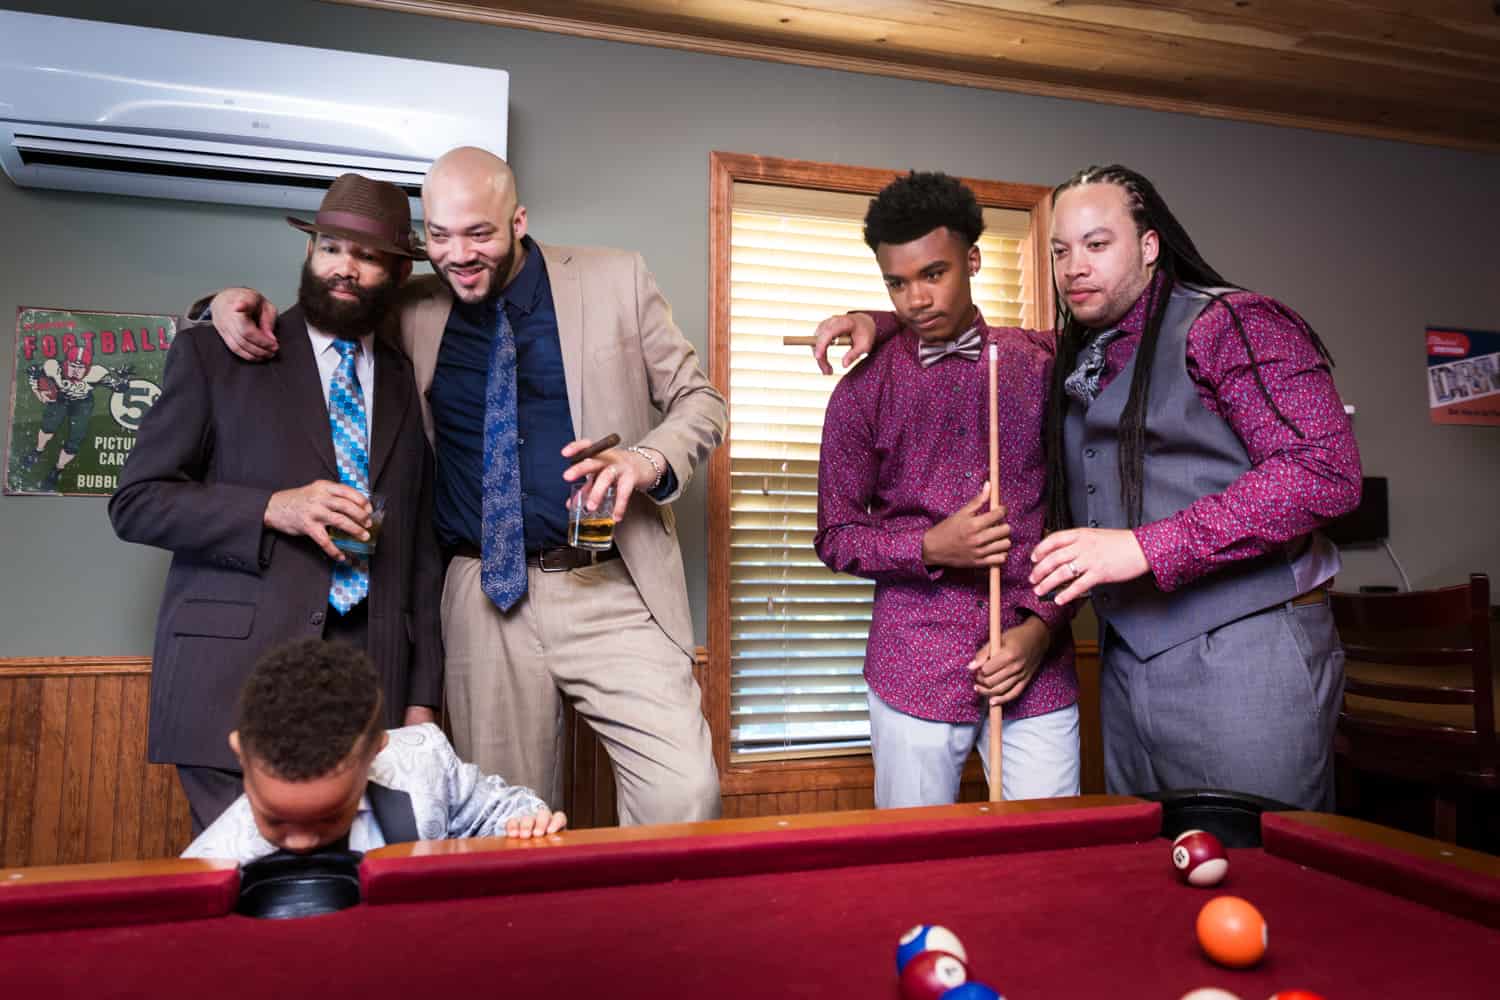 Male family members watching pool table during a family reunion portrait